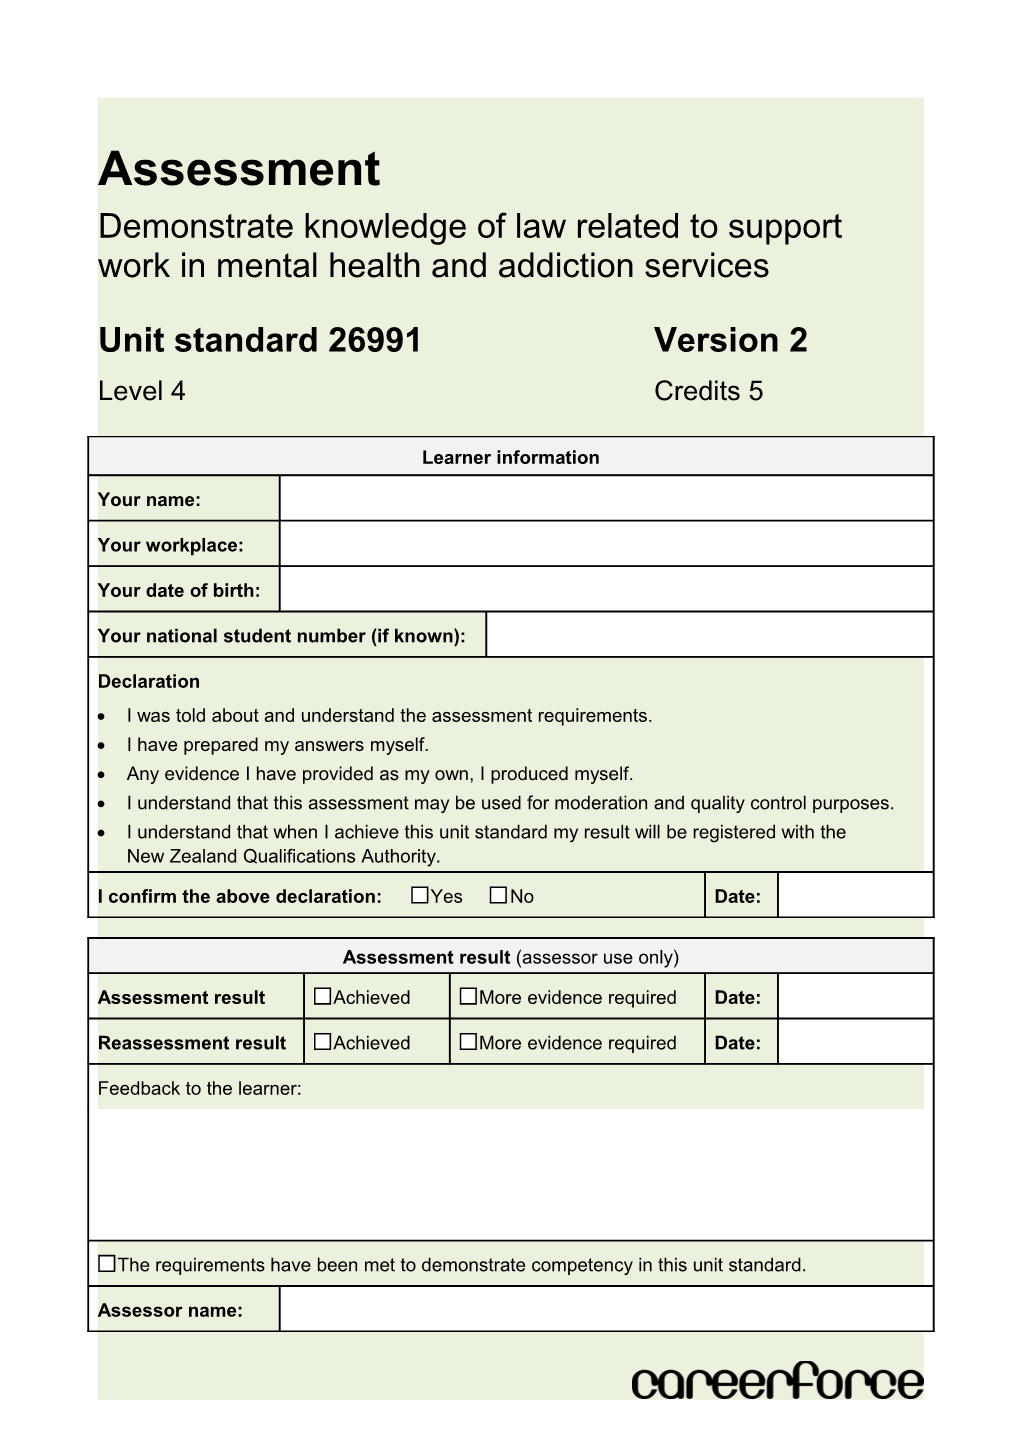 Demonstrate Knowledge of Law Related to Support Work in Mental Health and Addiction Services